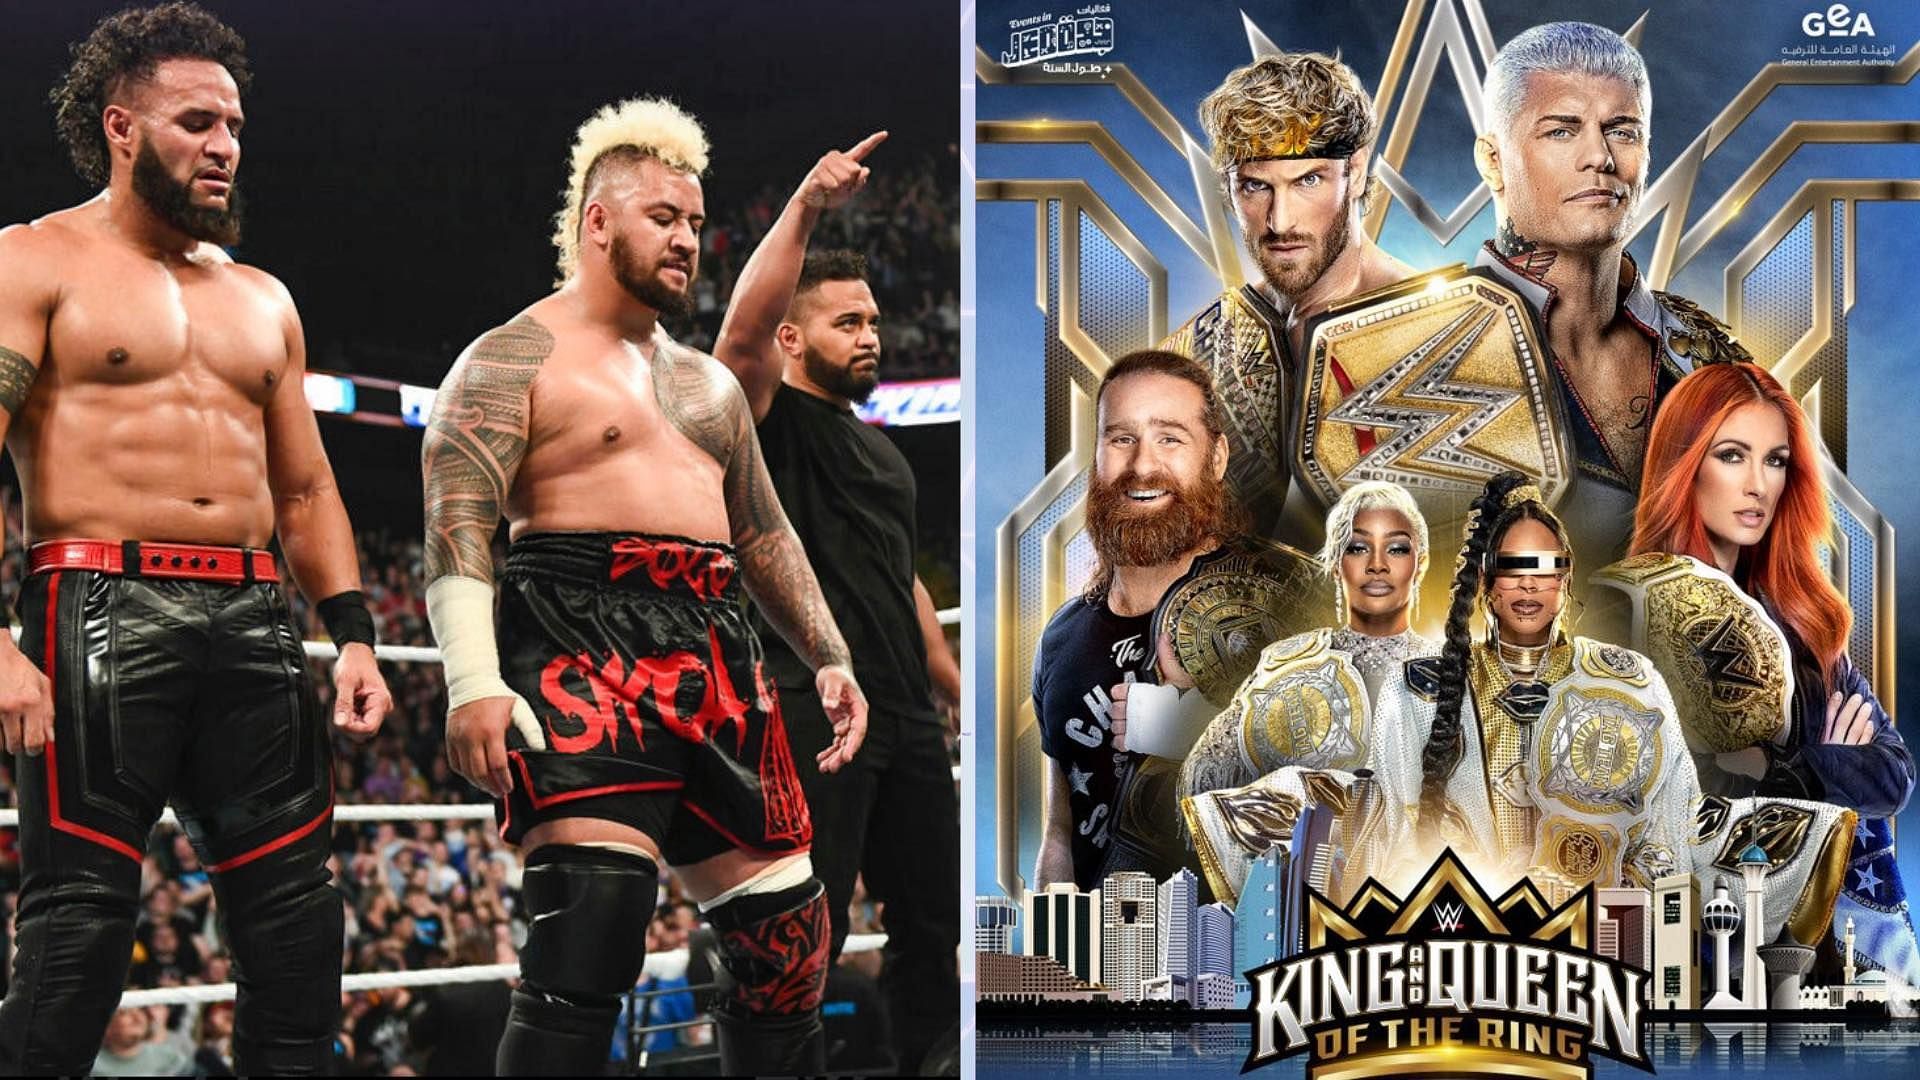 Some first round matches in the WWE King and Queen of the Ring tournaments should lead to feuds